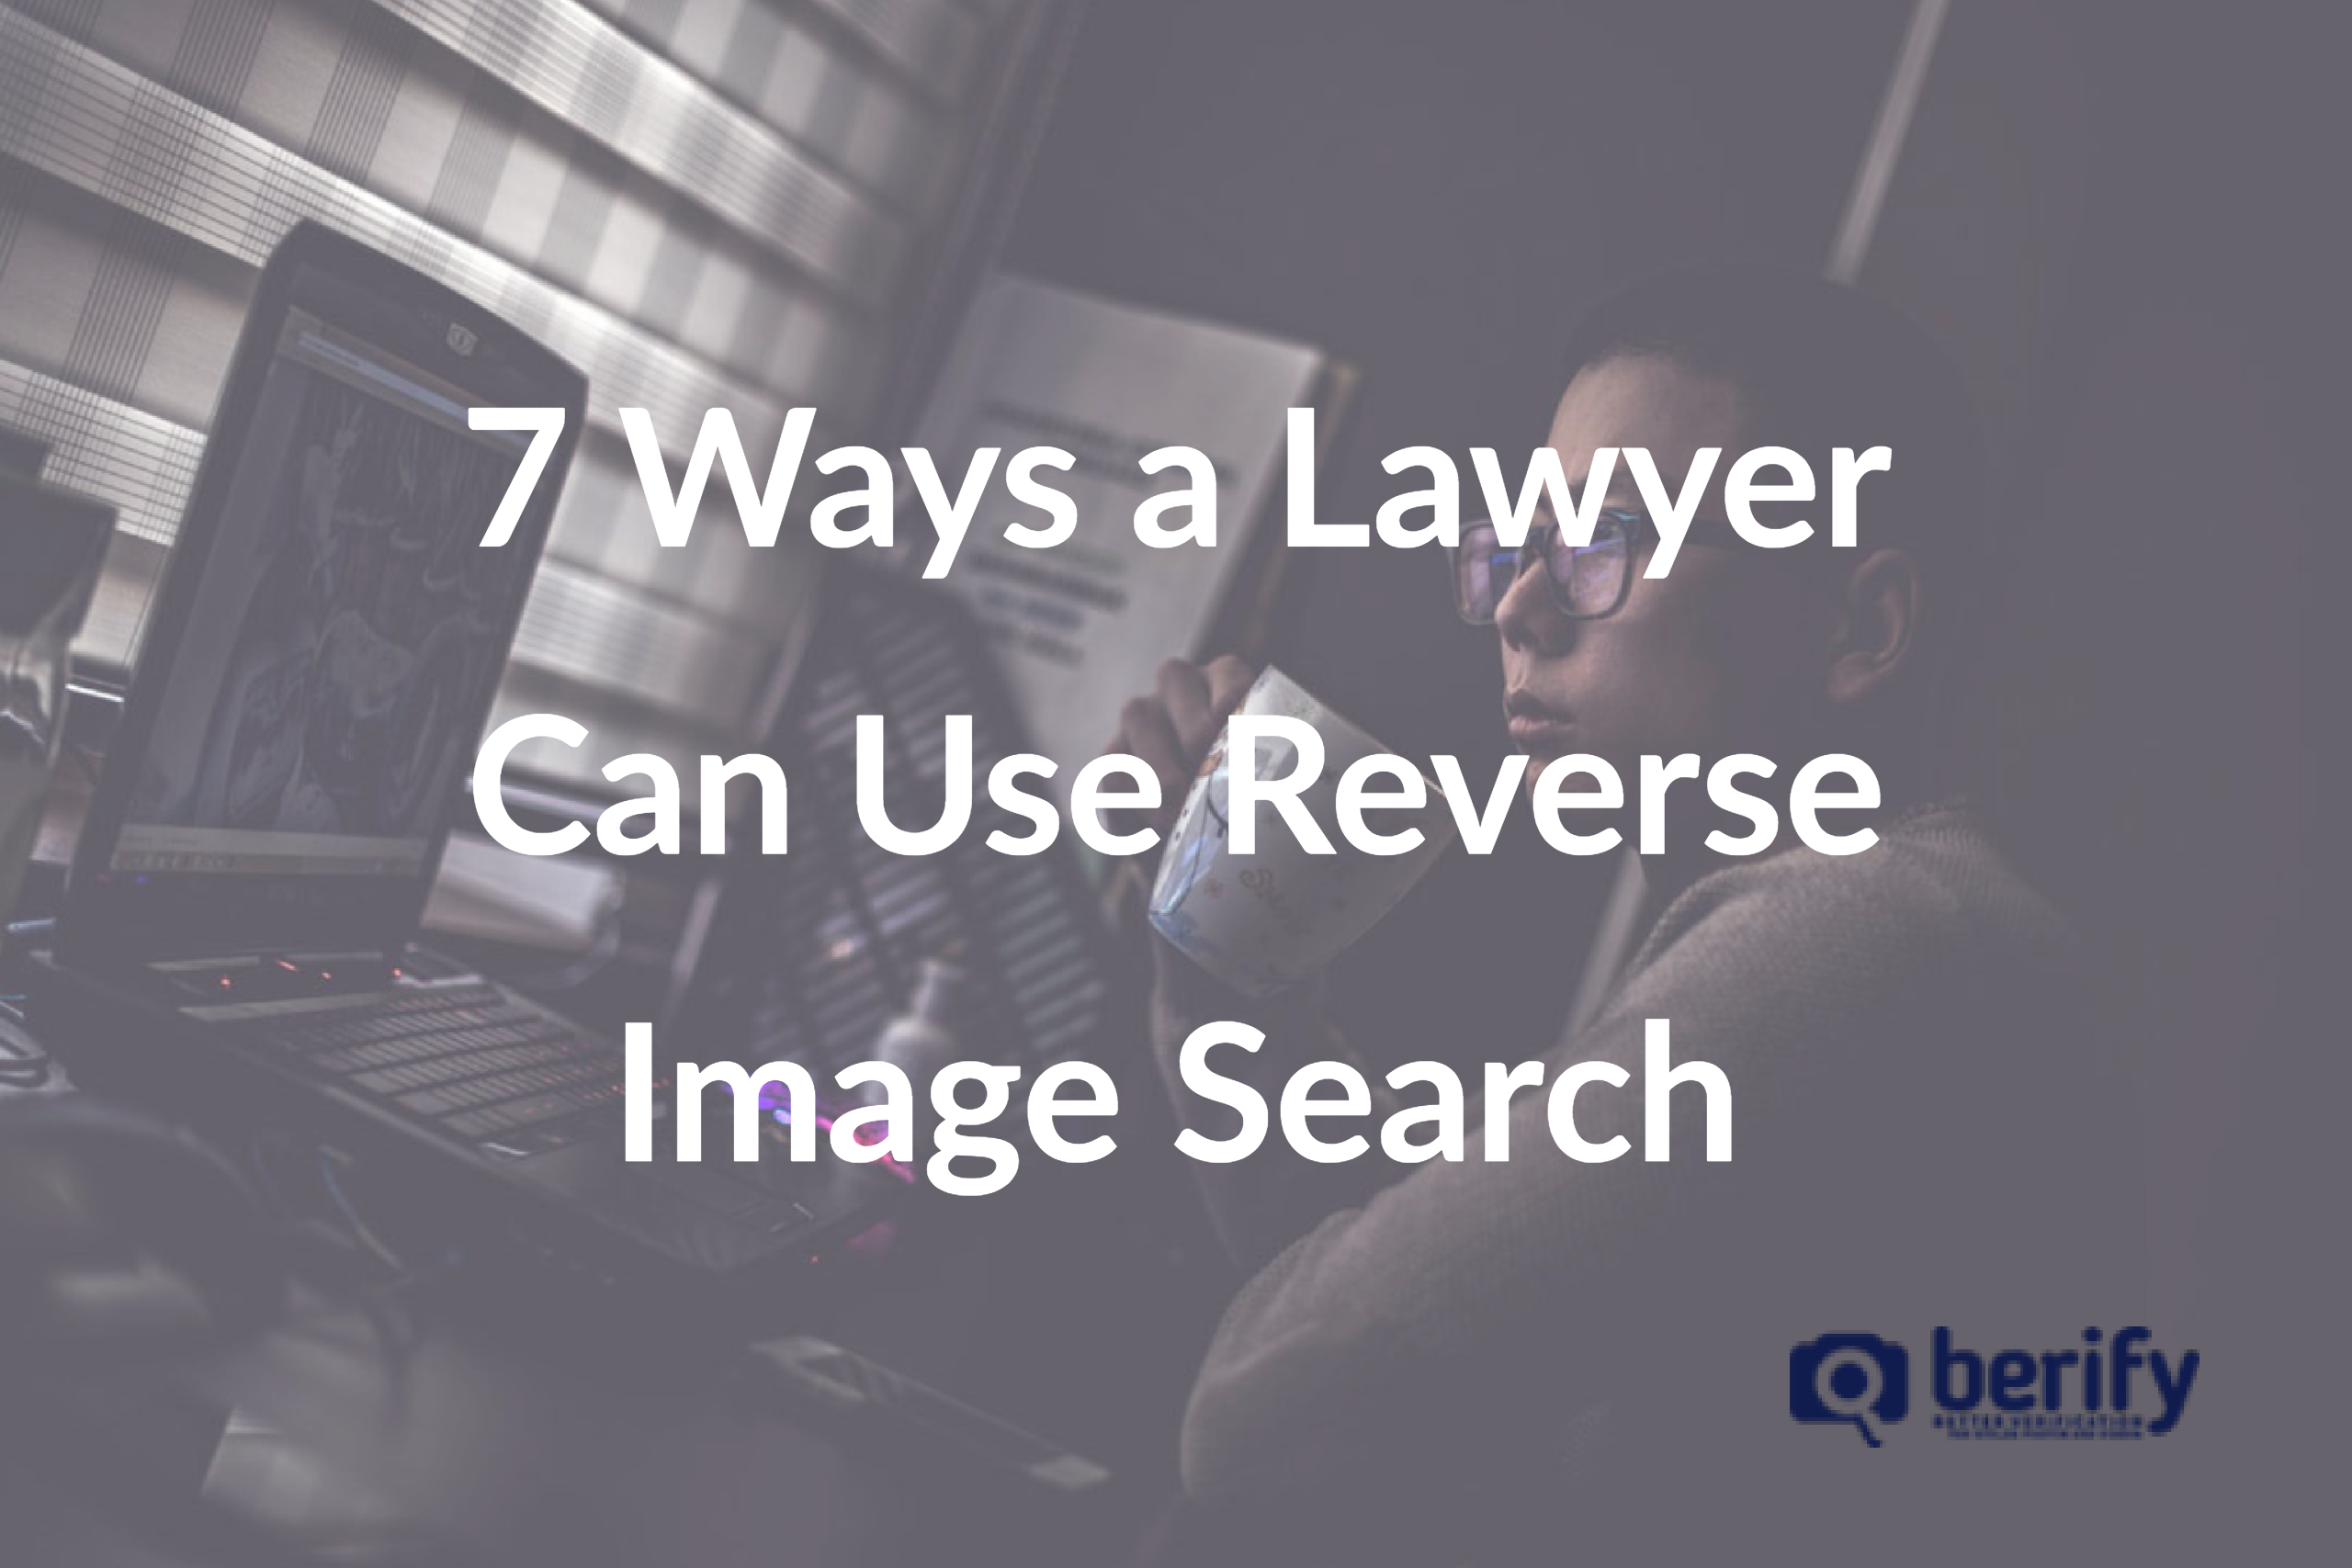 7 Ways a Lawyer Can Use Reverse Image Search